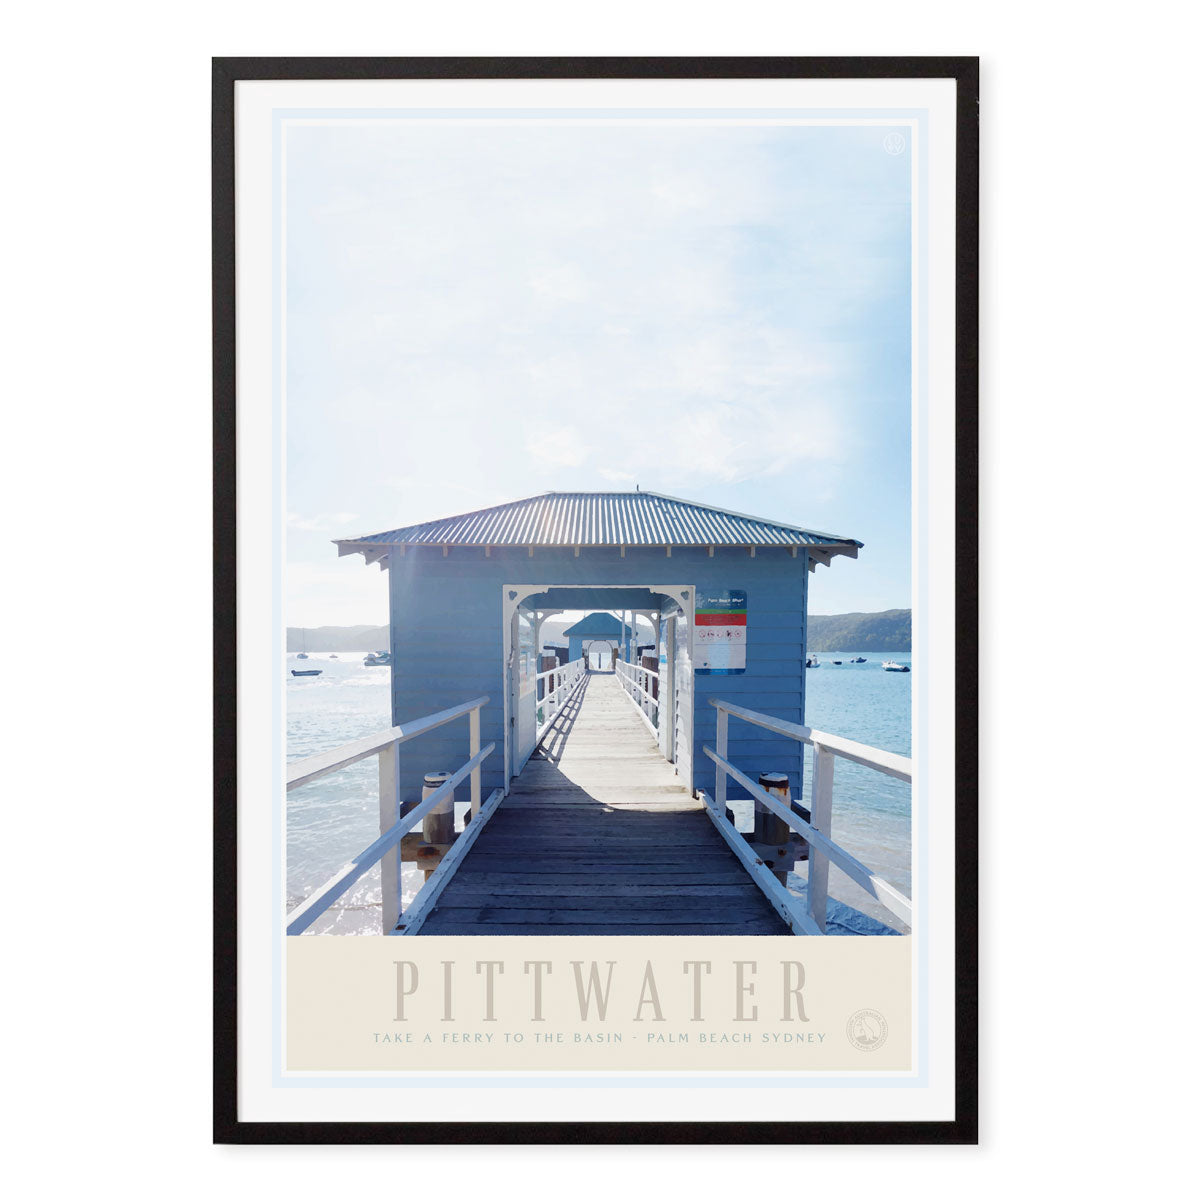 Pittwater Sydney Ferry print. Vintage retro travel poster print in black frame from Places We Luv